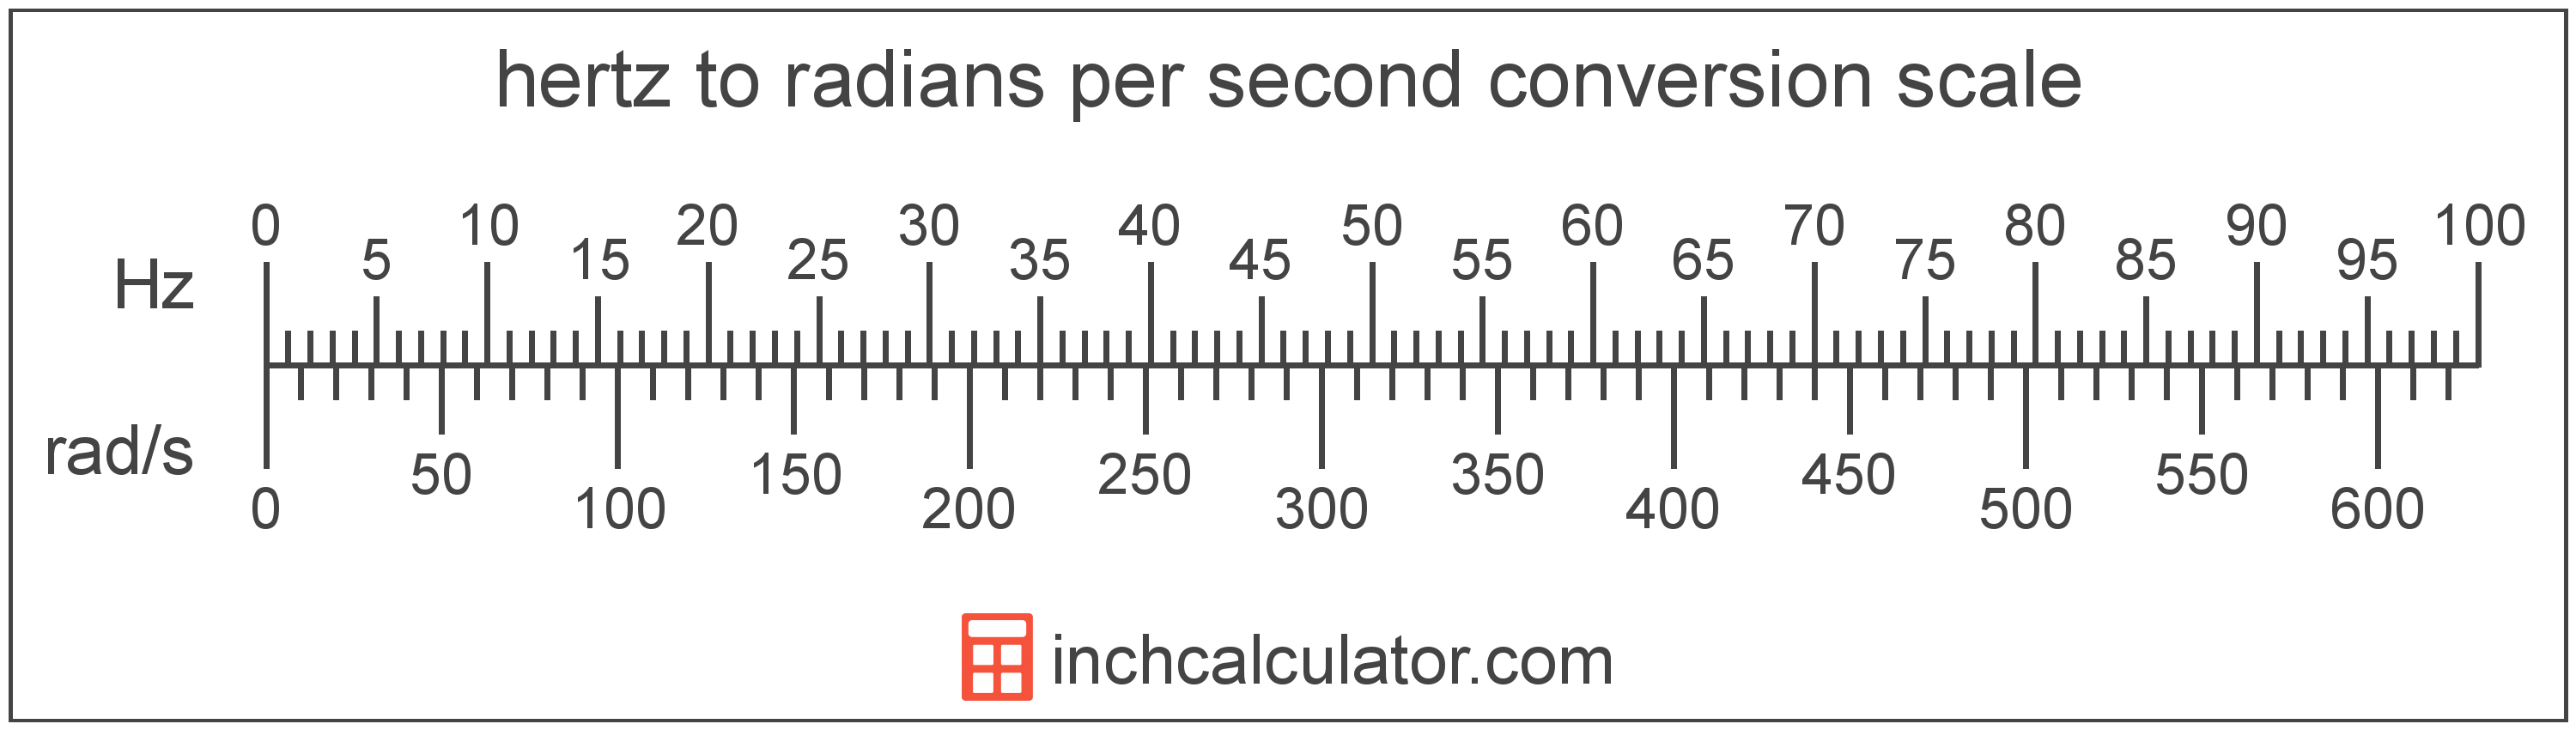 conversion scale showing hertz and equivalent radians per second frequency values